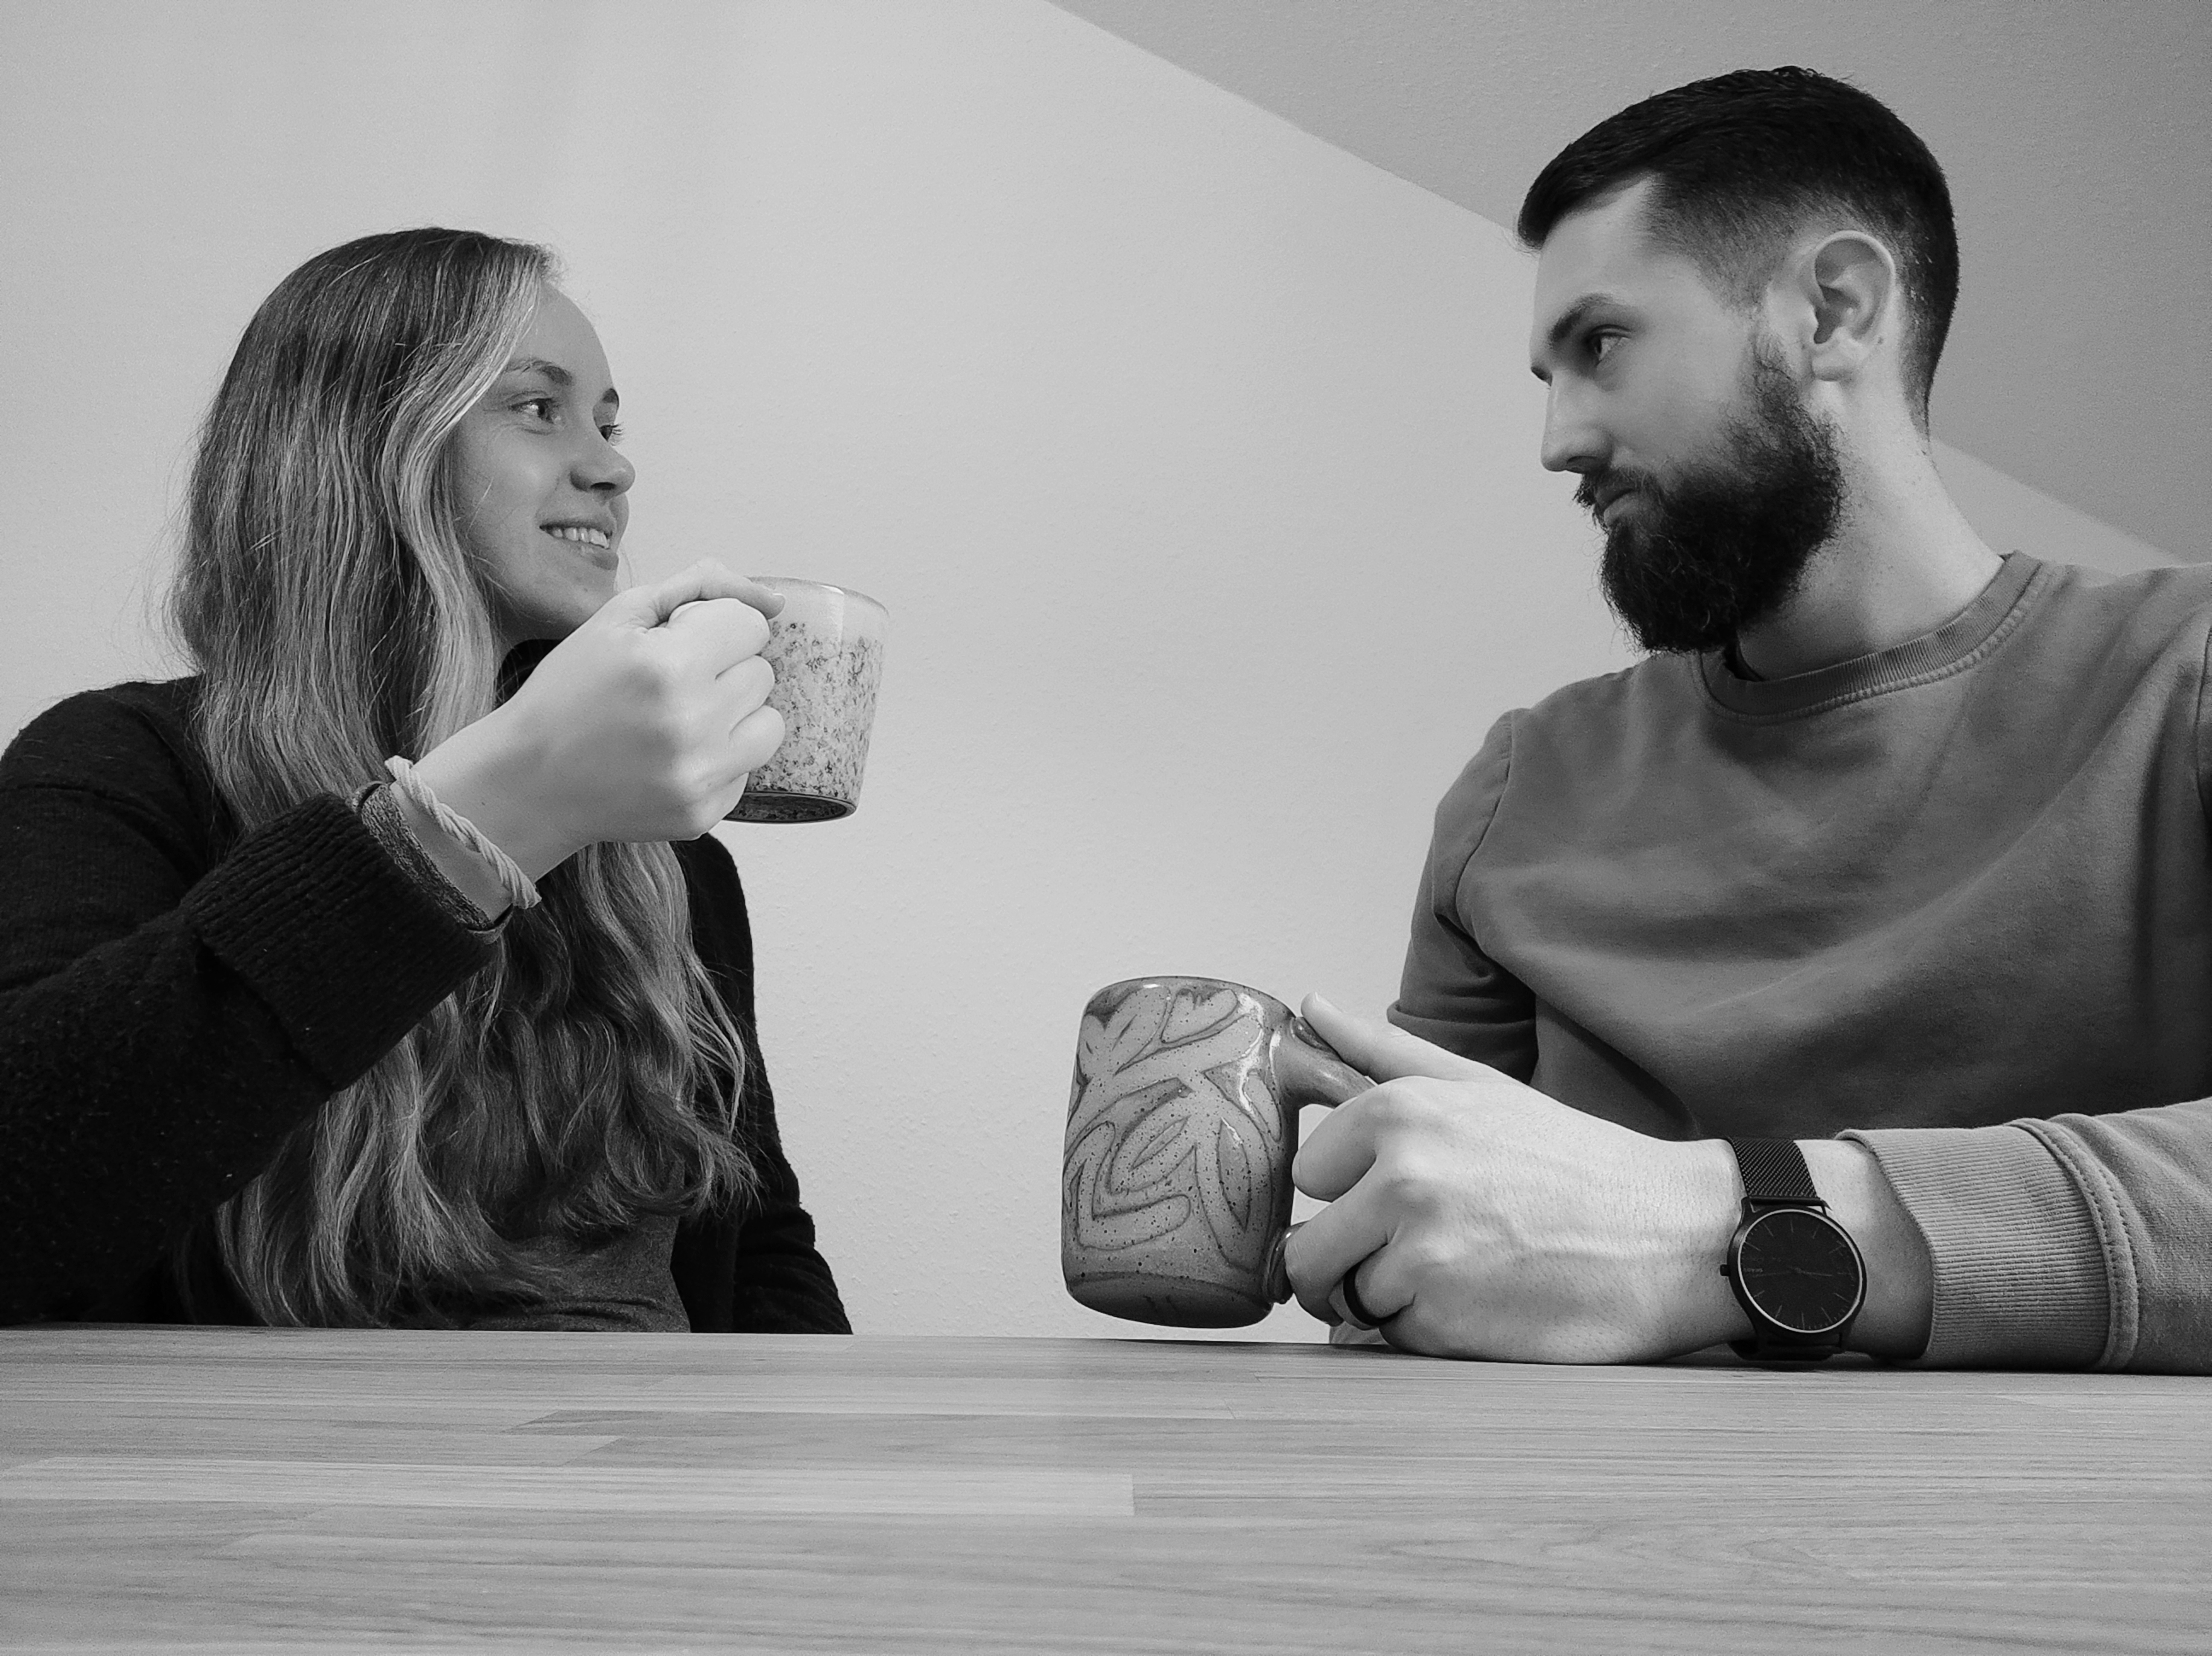 A woman with long, blonde hair and a man with short, dark hair are sitting at a table with their coffee cups. They are involved in a conversation.